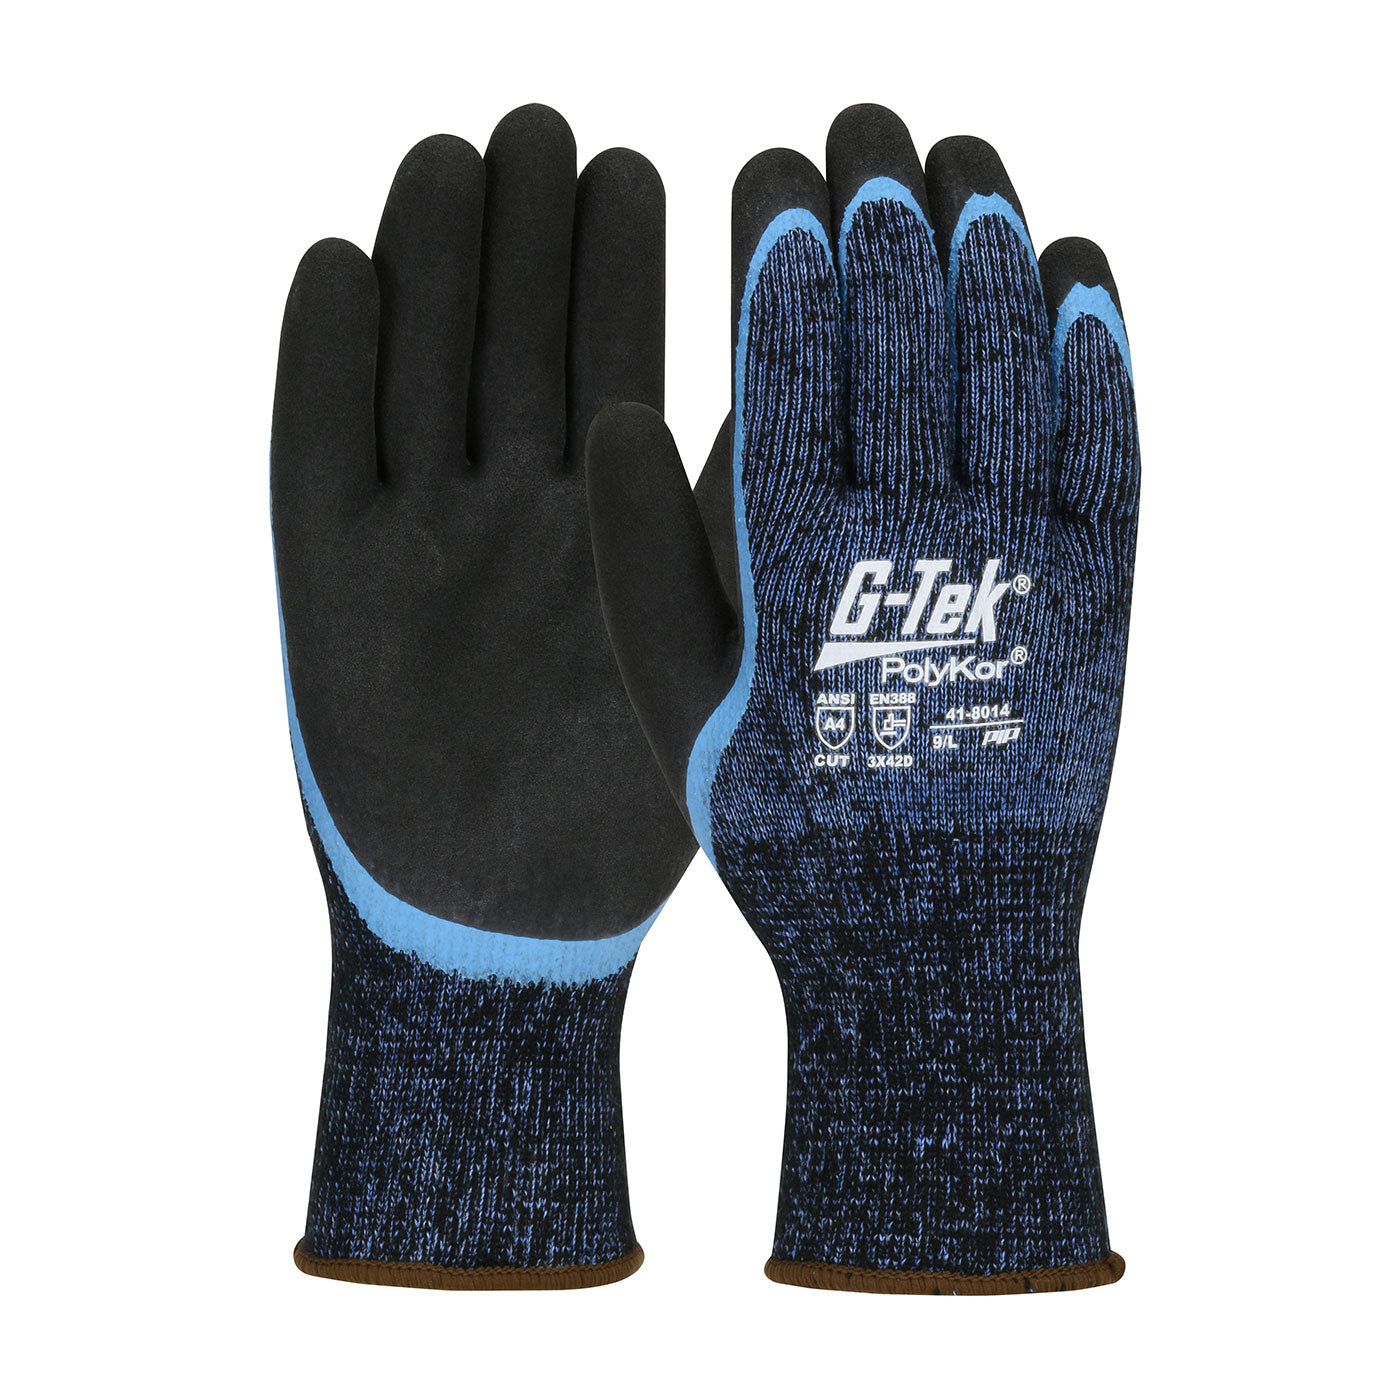 G-Tek® PolyKor® Seamless Knit Single-Layer PolyKor® / Acrylic Blended Glove with Double-Dipped Latex Coated MicroSurface Grip on Palm & Fingers-eSafety Supplies, Inc